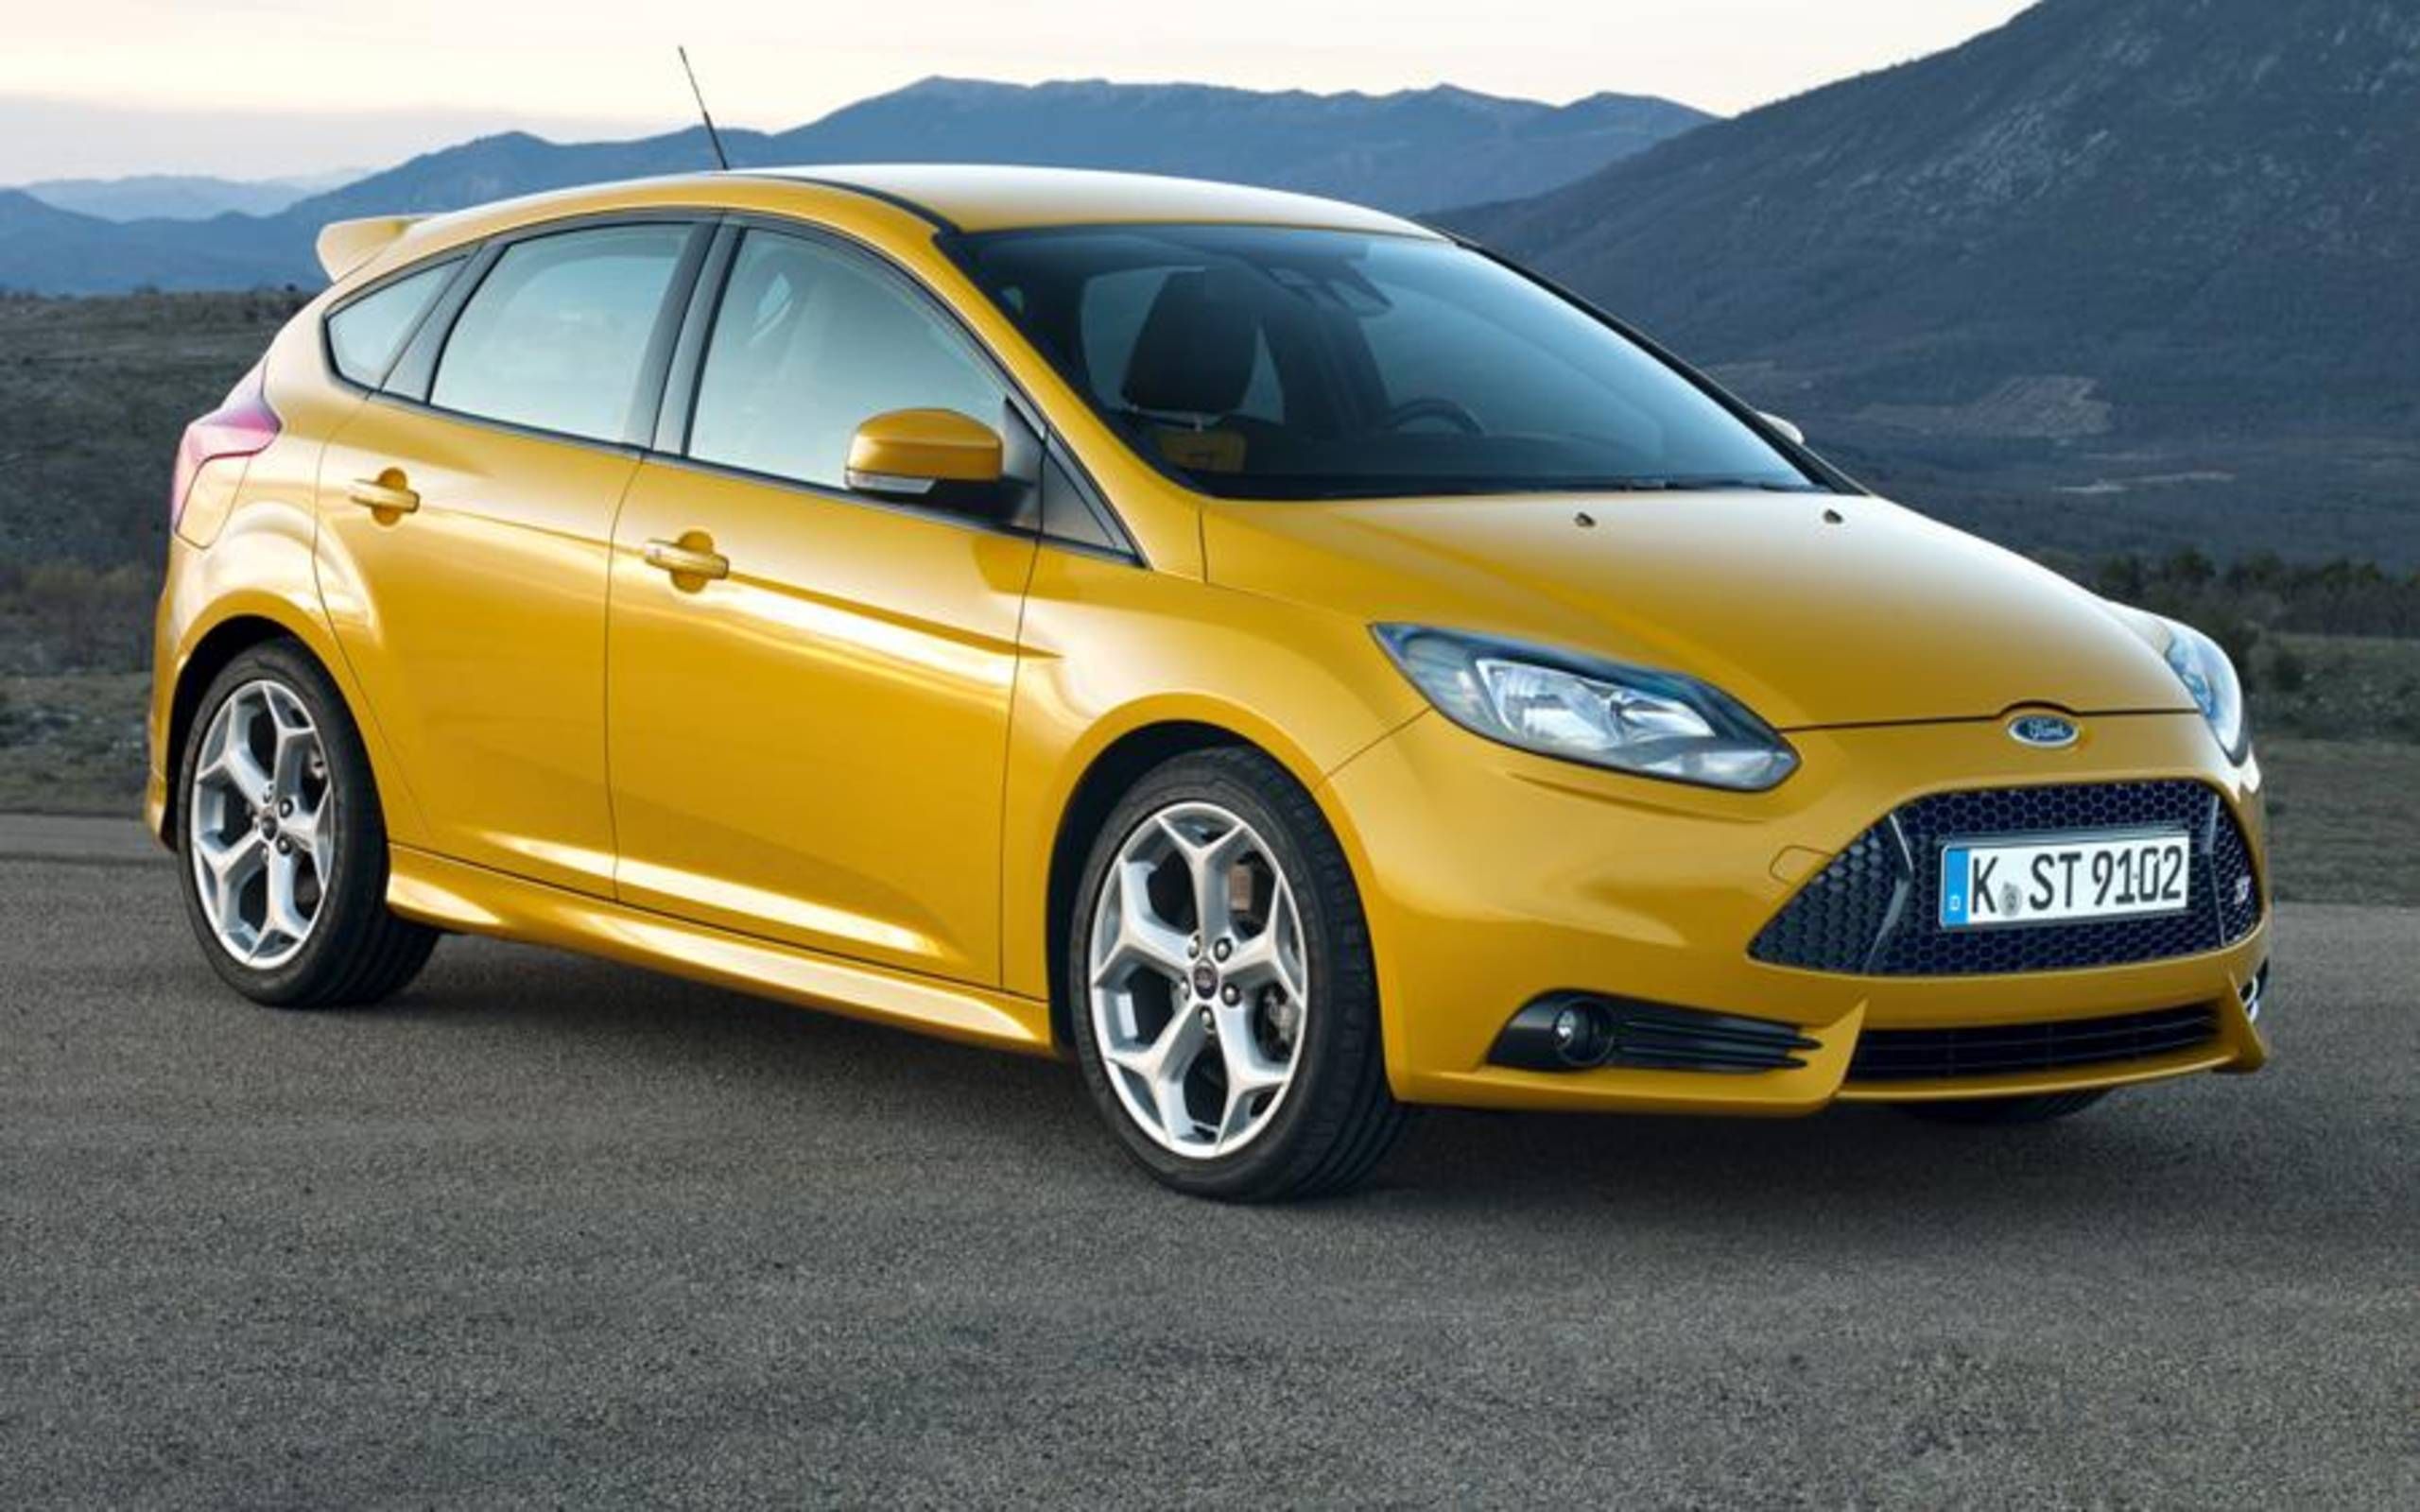 2013 Ford Focus ST: Drive review: The new king of compact hot hatchbacks